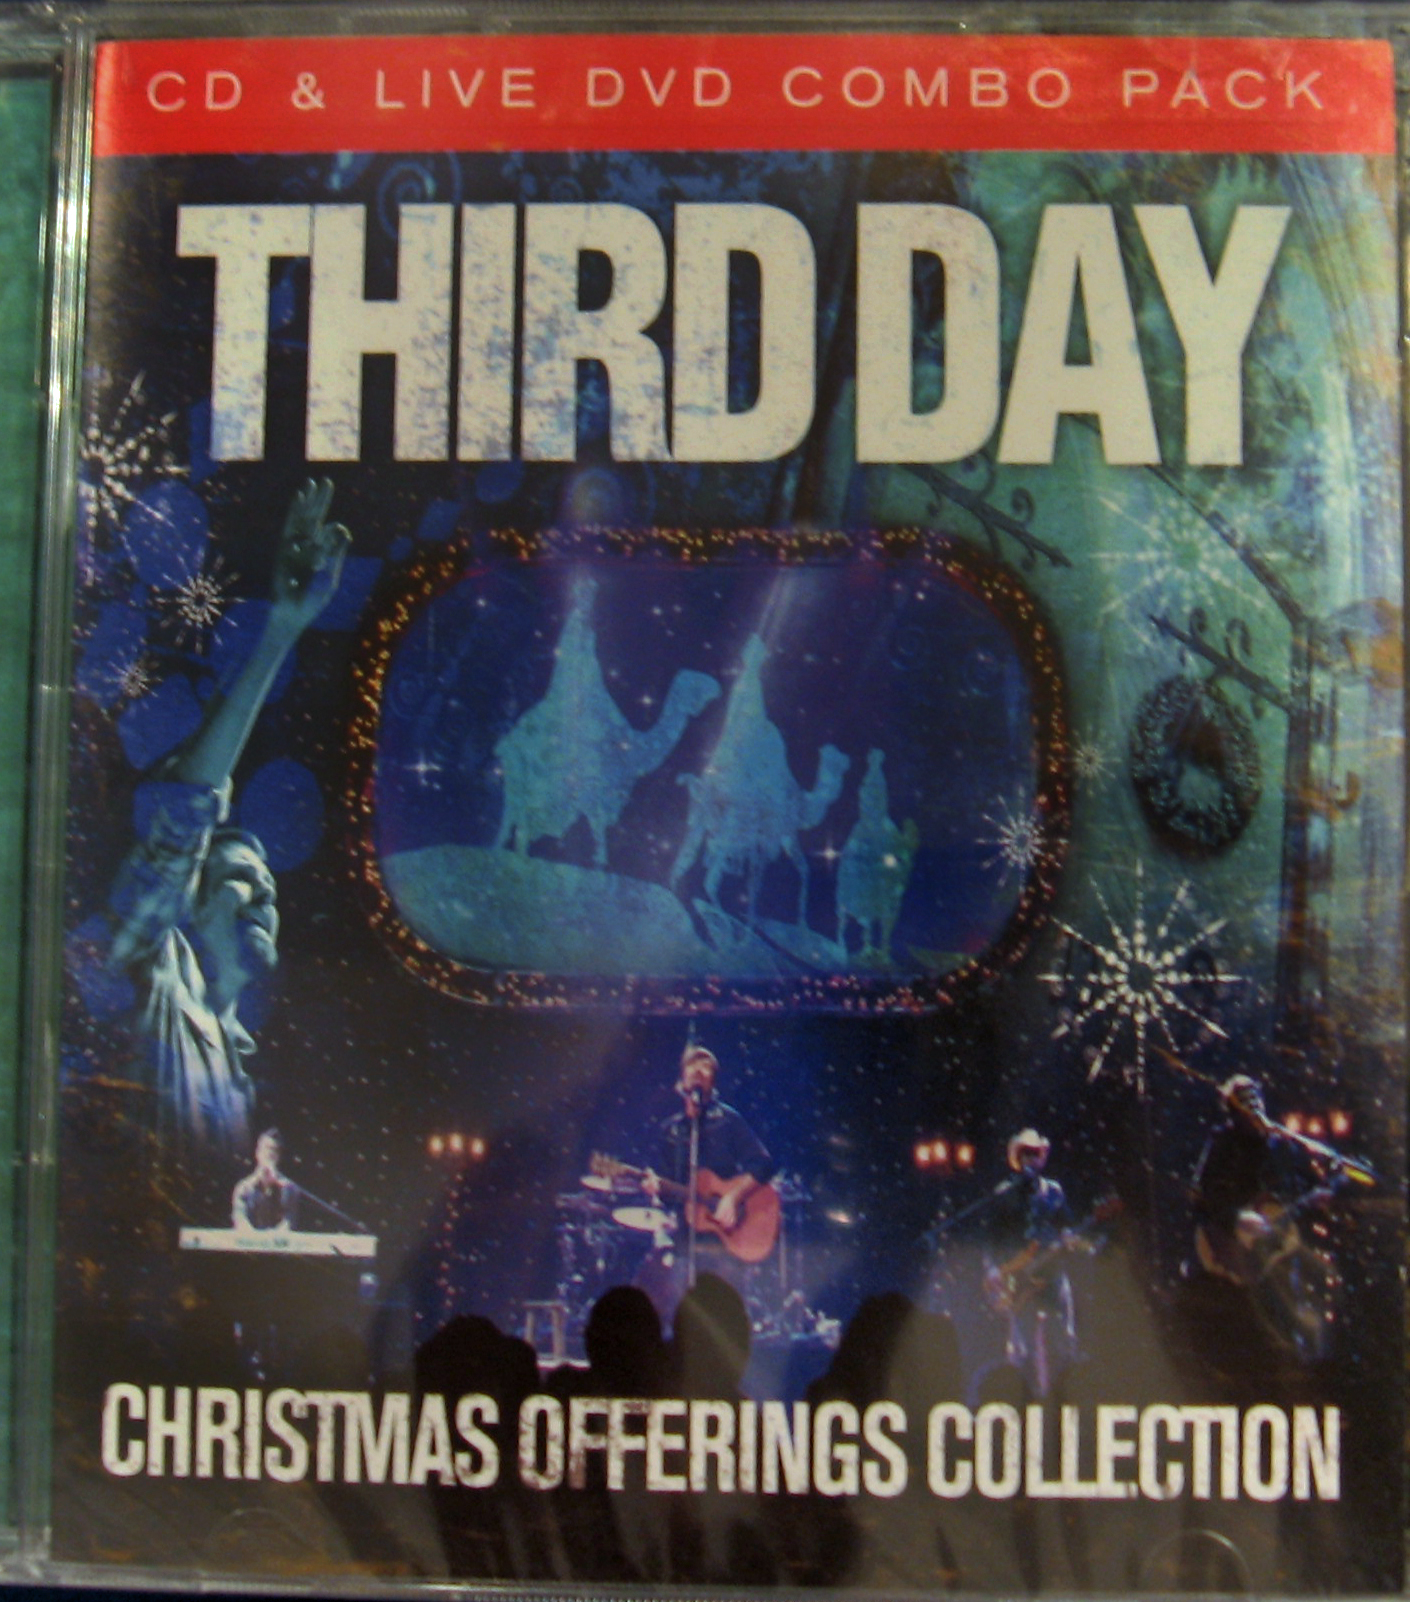 Third Day: Christmas Offerings Collection, CD & DVD Combo